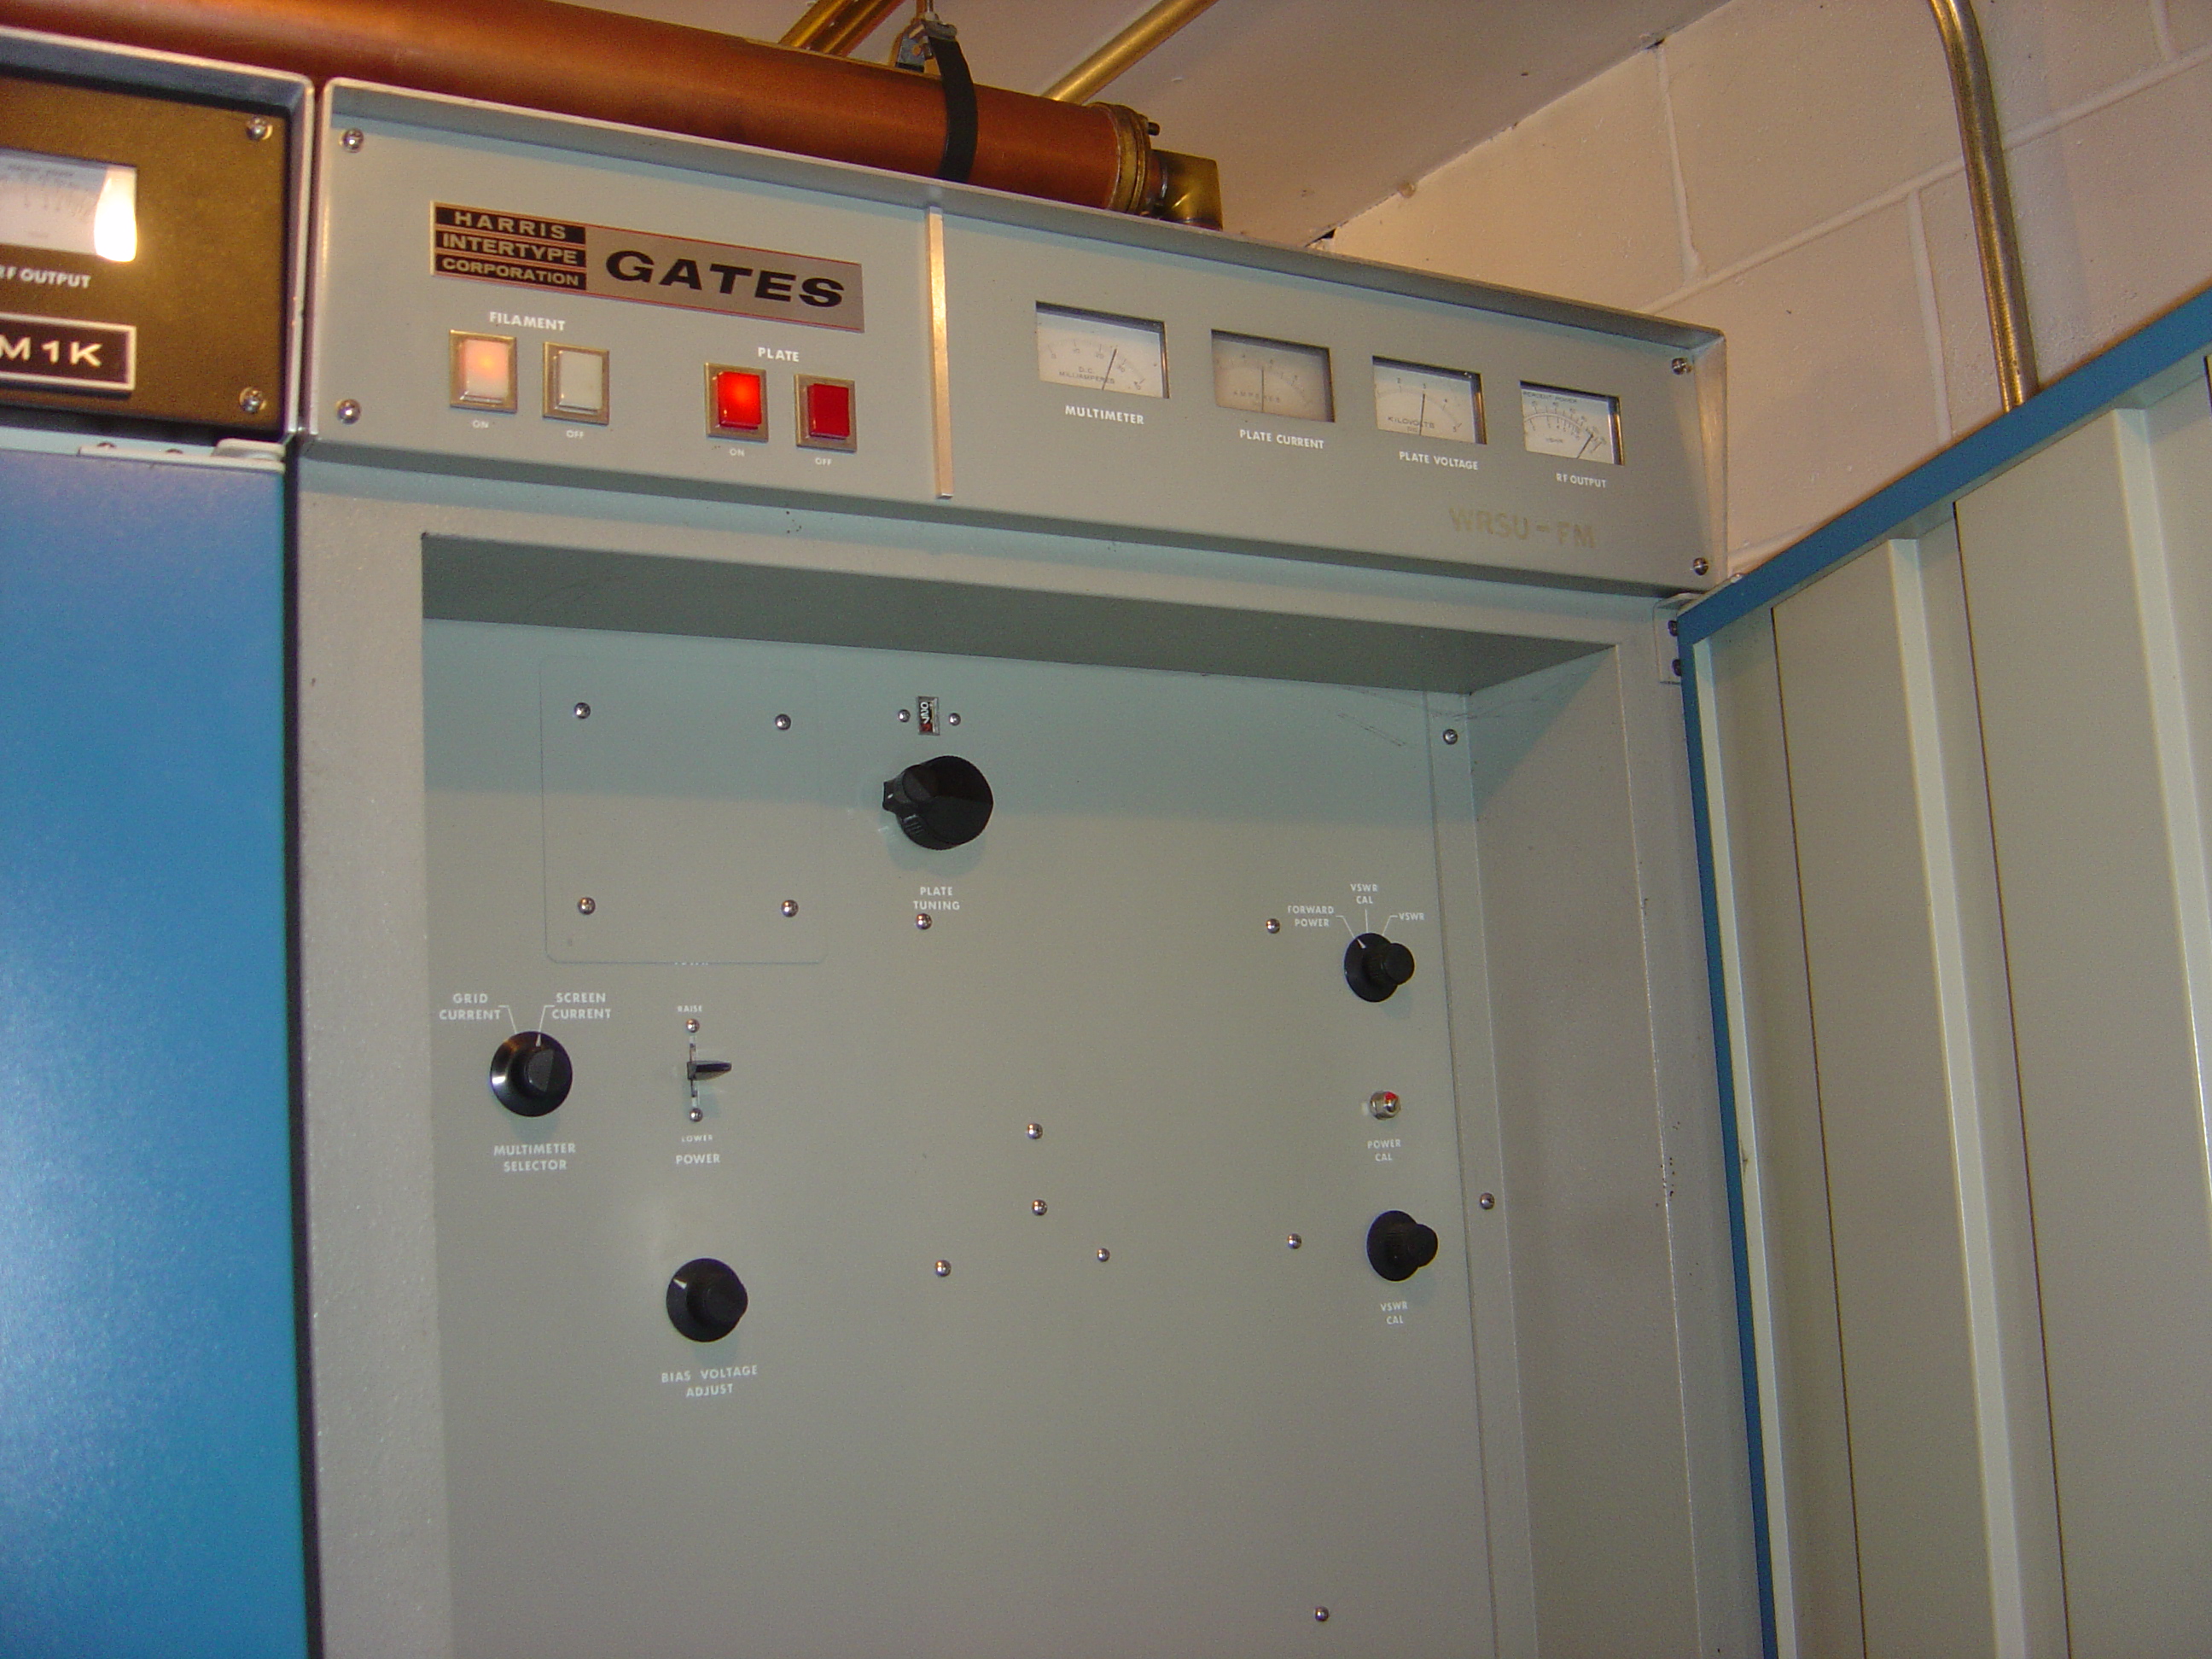 2006 - The Auxilary Transmitter - this is the FIRST FM Transmitter. This transmitter worked until the mid 2010s